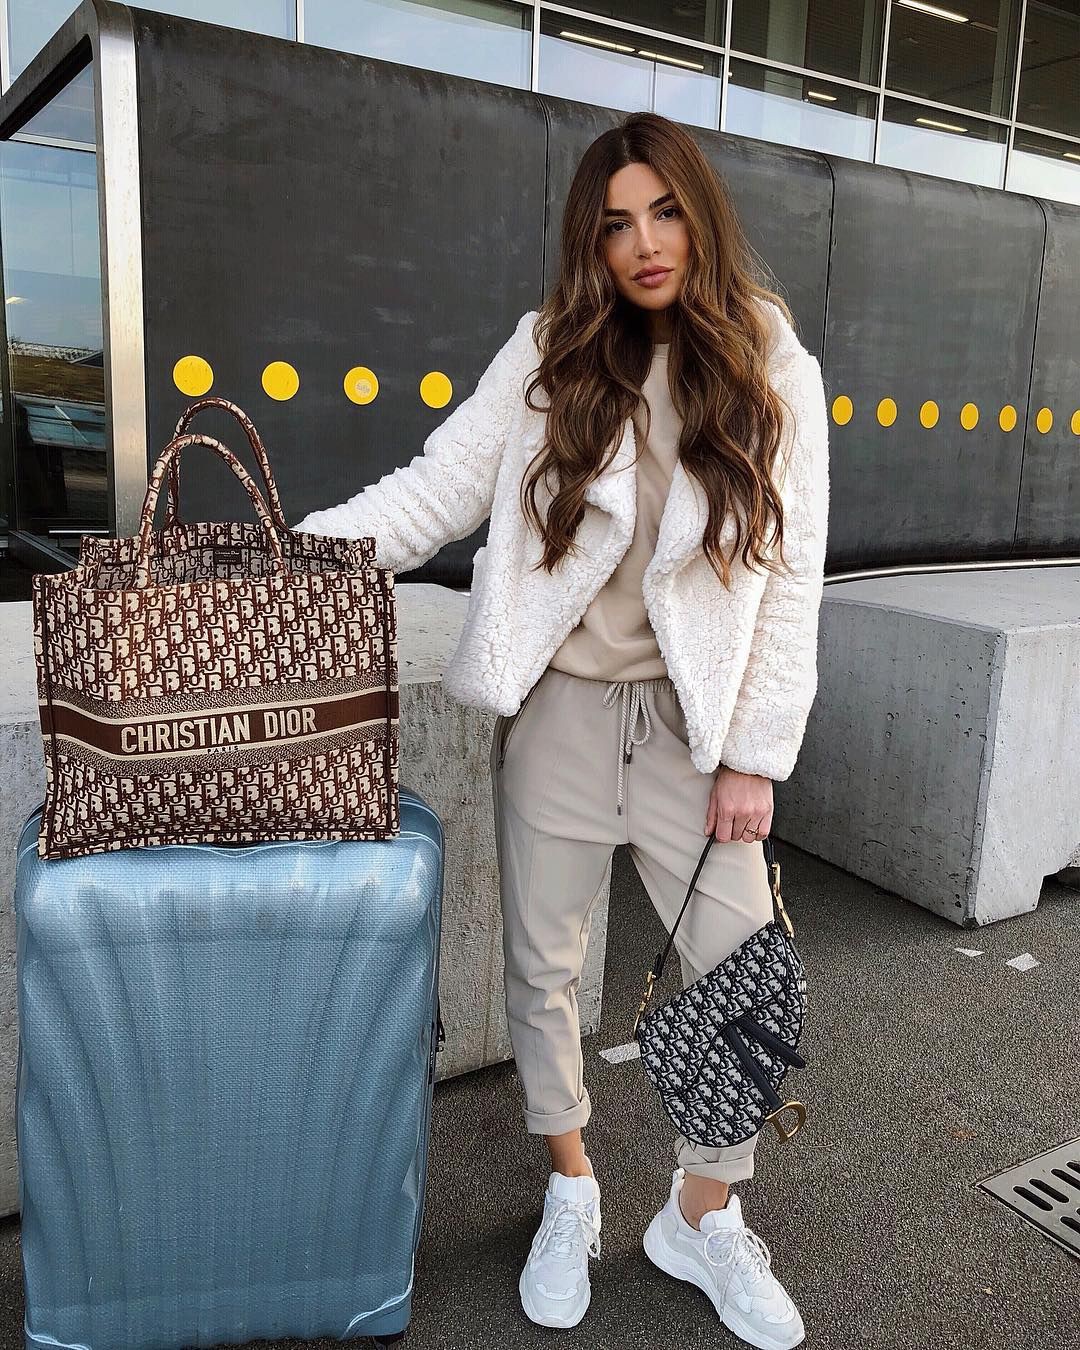 Clothing ideas negin mirsalehi style, negin mirsalehi, street fashion, casual wear: White Outfit,  Street Style,  Airport Outfit Ideas  